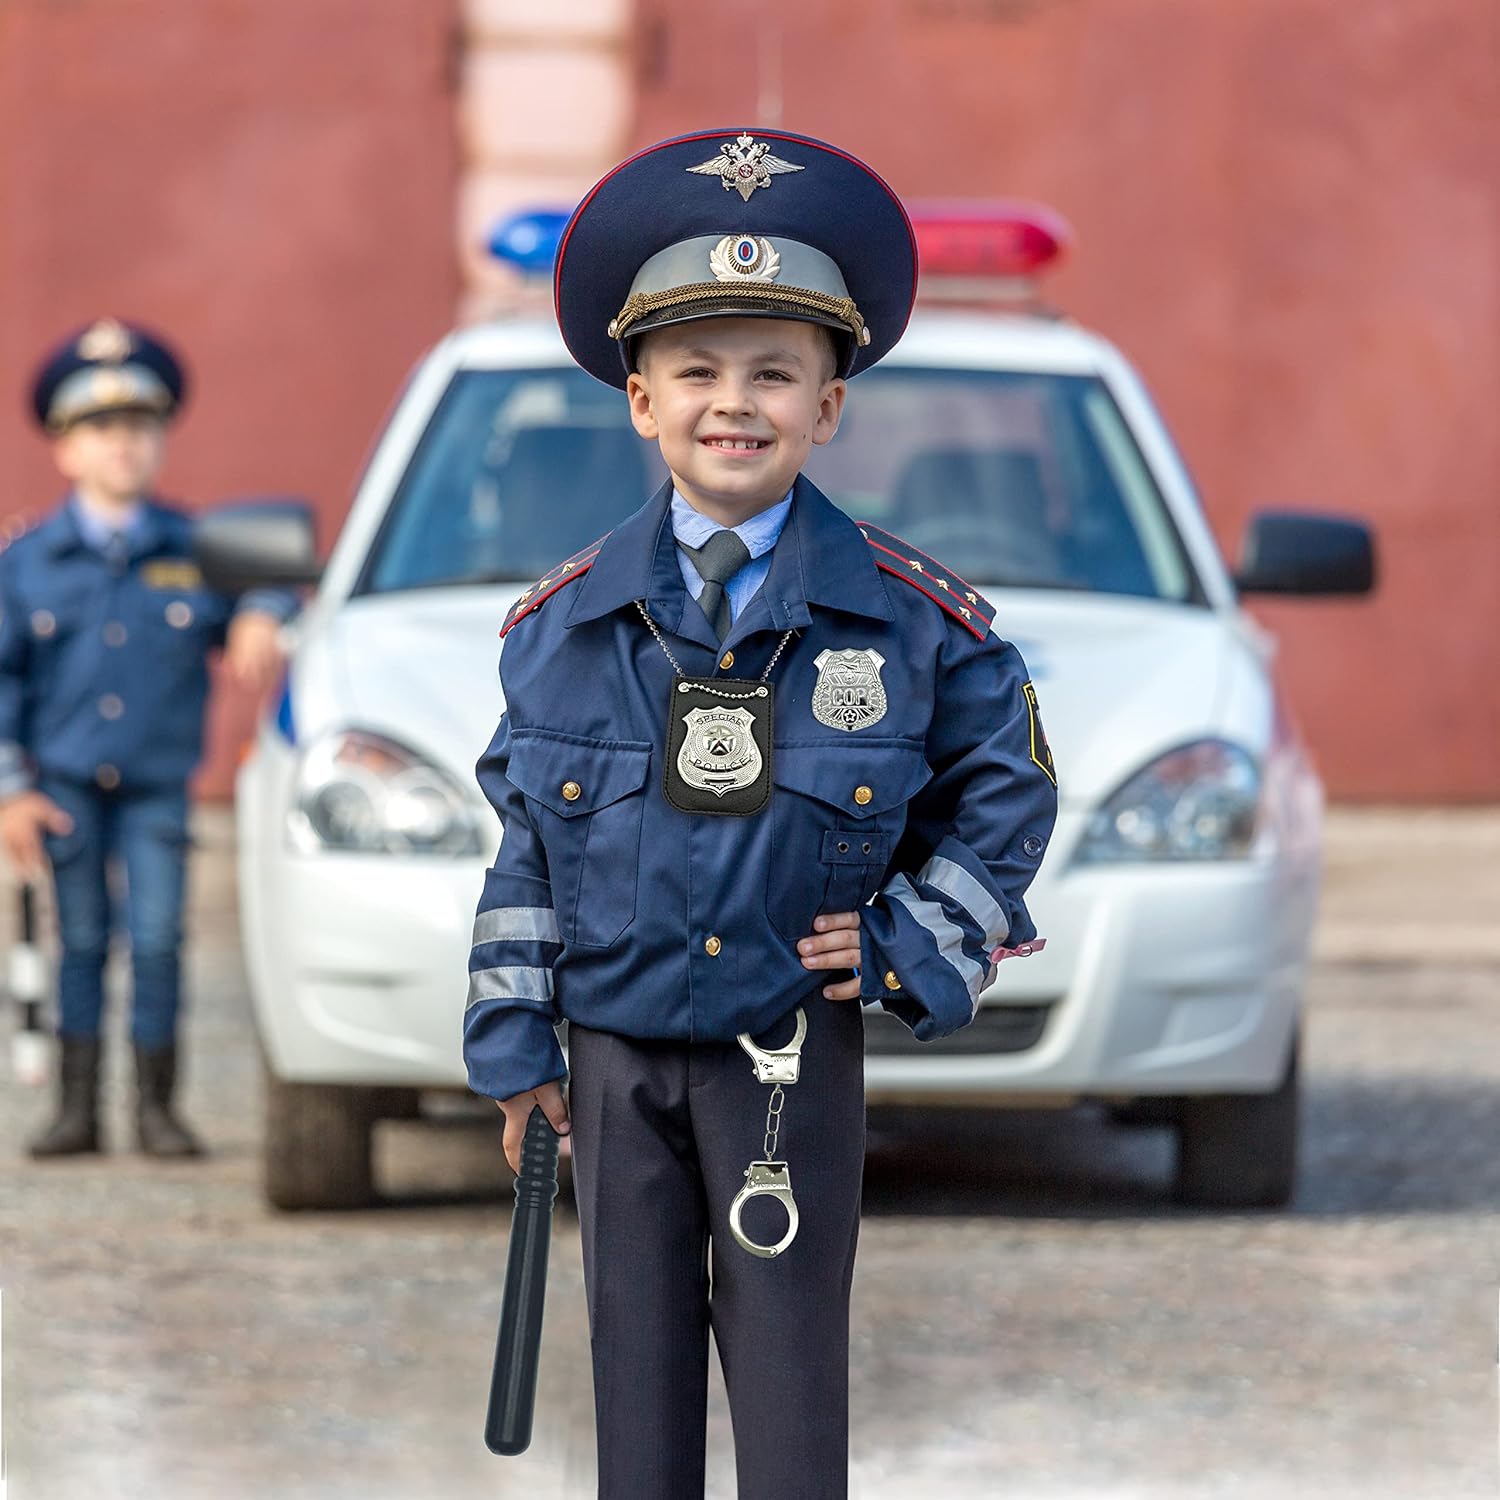 6 Pcs Set Police Accessories - Police Gear for Pretend Play, Police Officer Costume Accessories Boys & Girls Kids Adults Dress Up